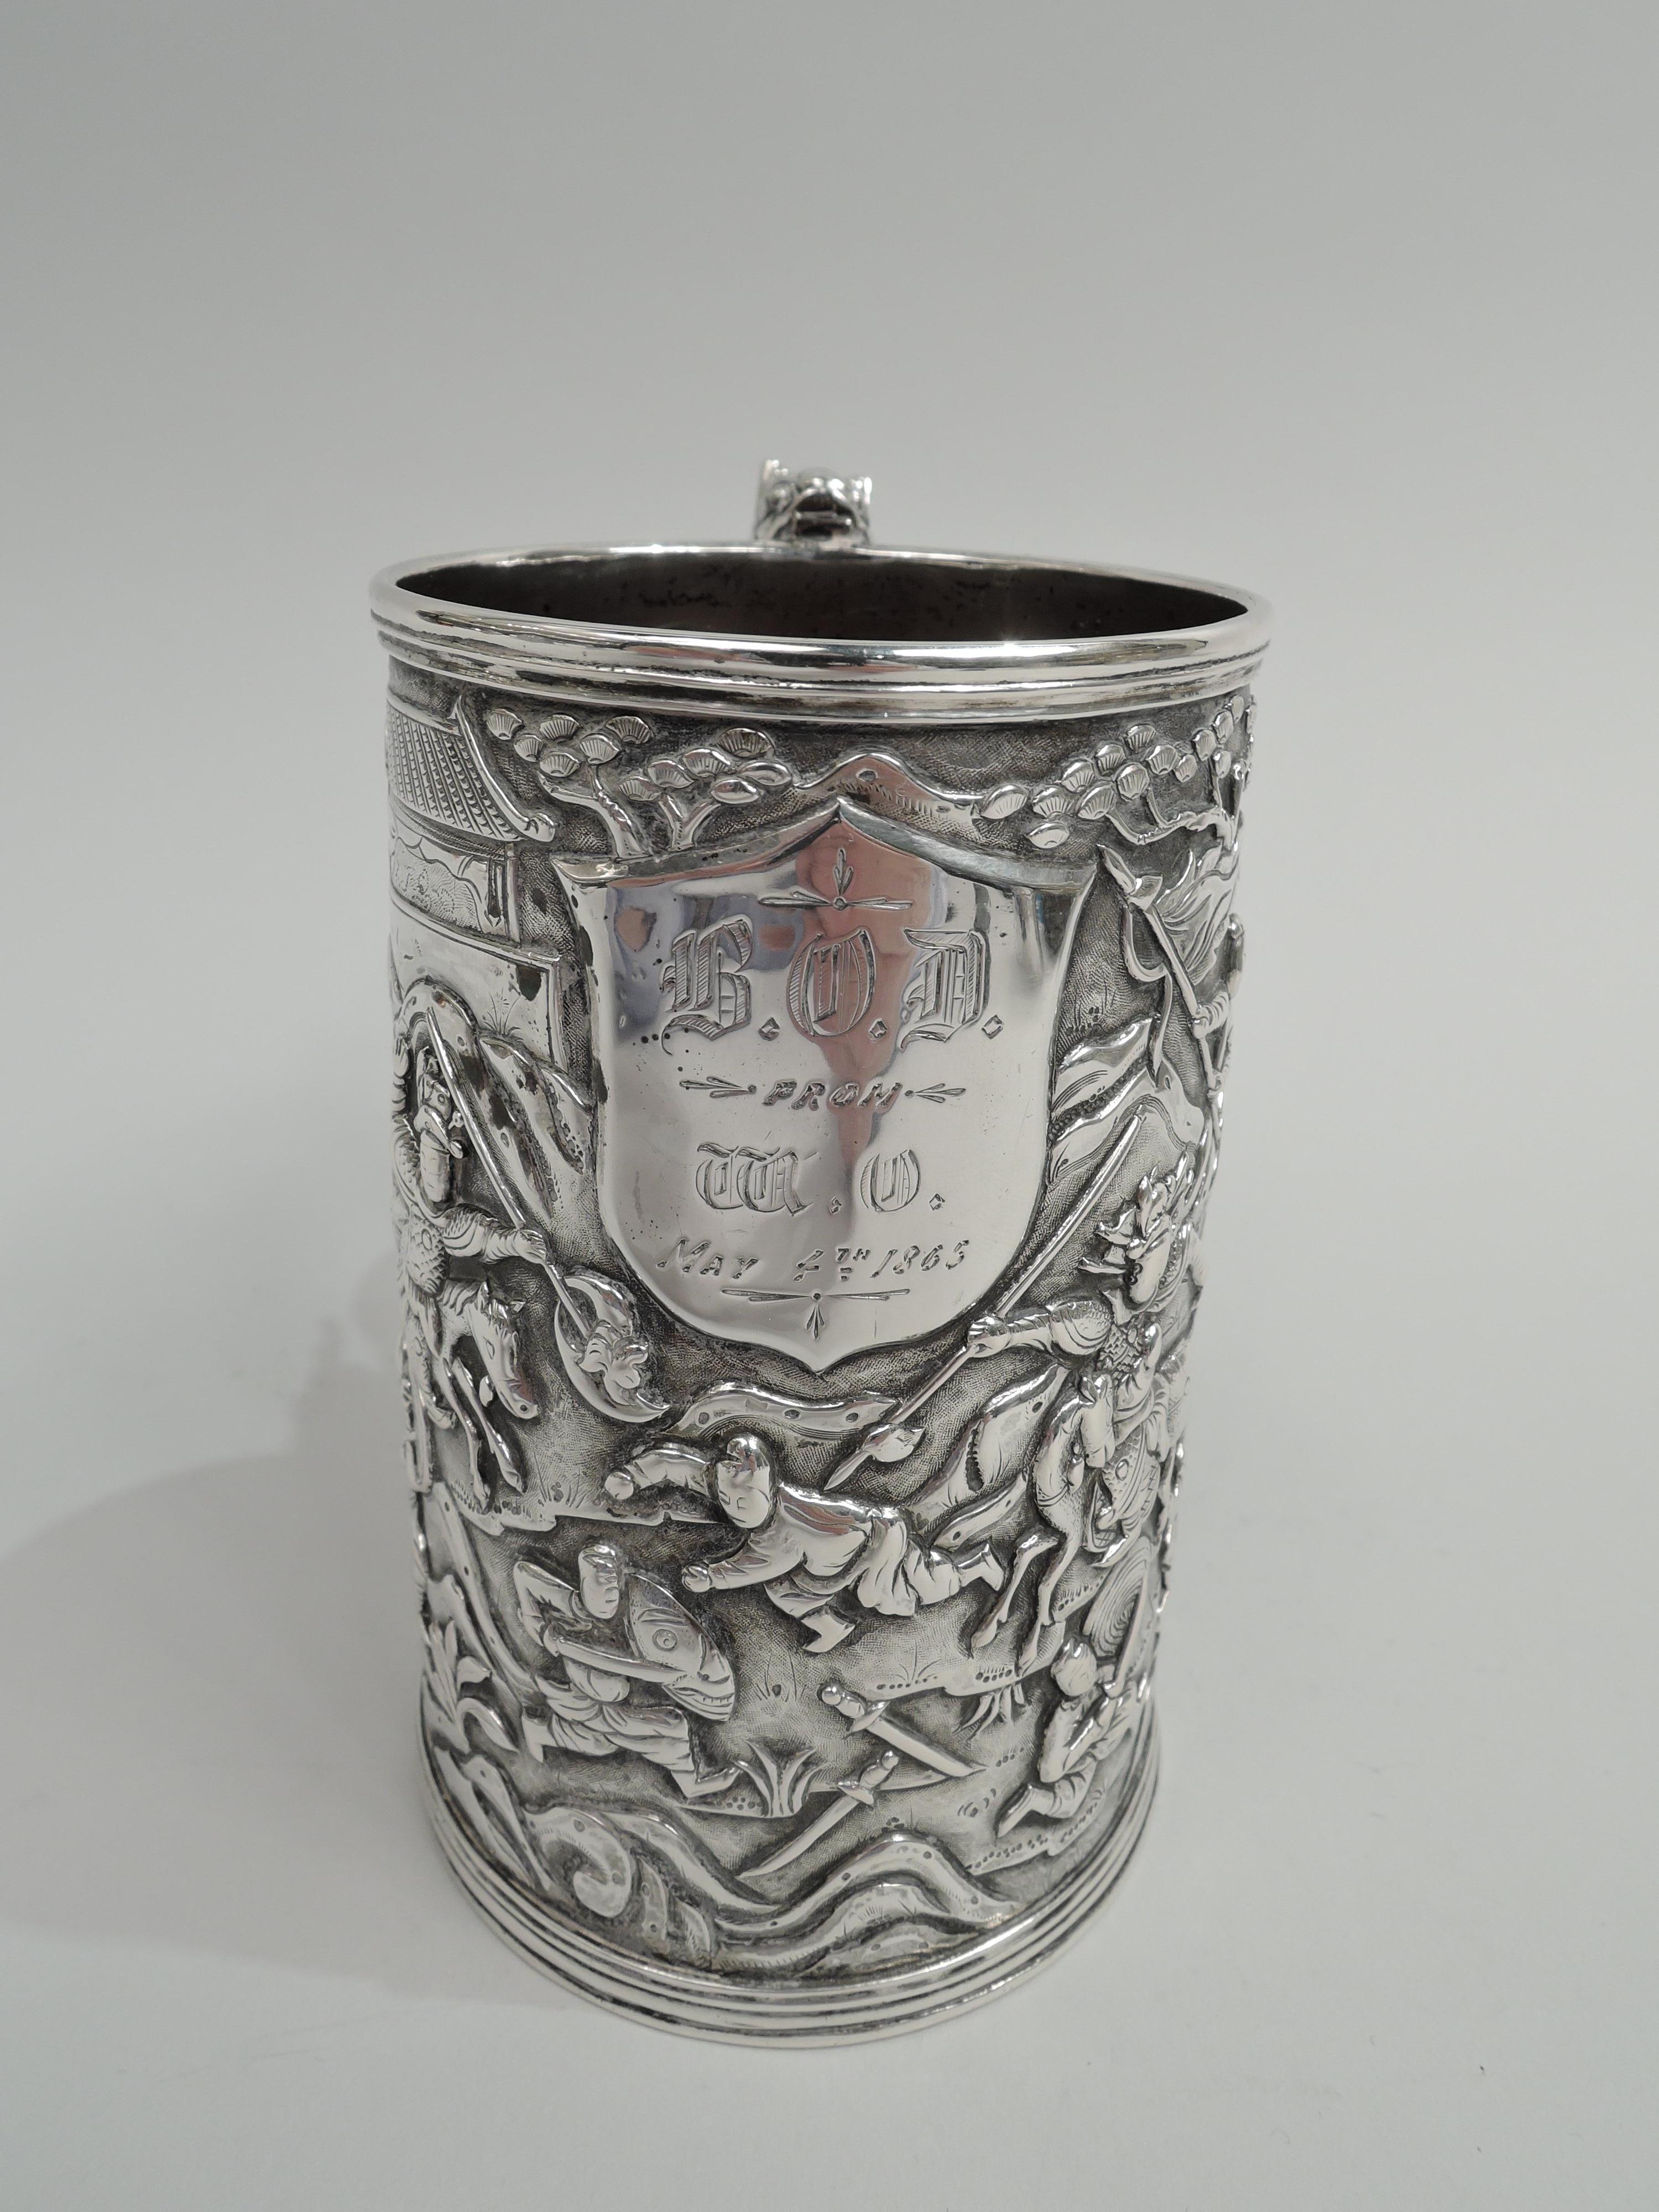 Chinese silver mug, ca 1865. Straight and upward tapering sides with dense low-relief frieze: Spearmen and swordsmen on foot and horse thrust and lunge and, in some cases, fall in battle. Applied armorial shield with engraved presentation dated “May